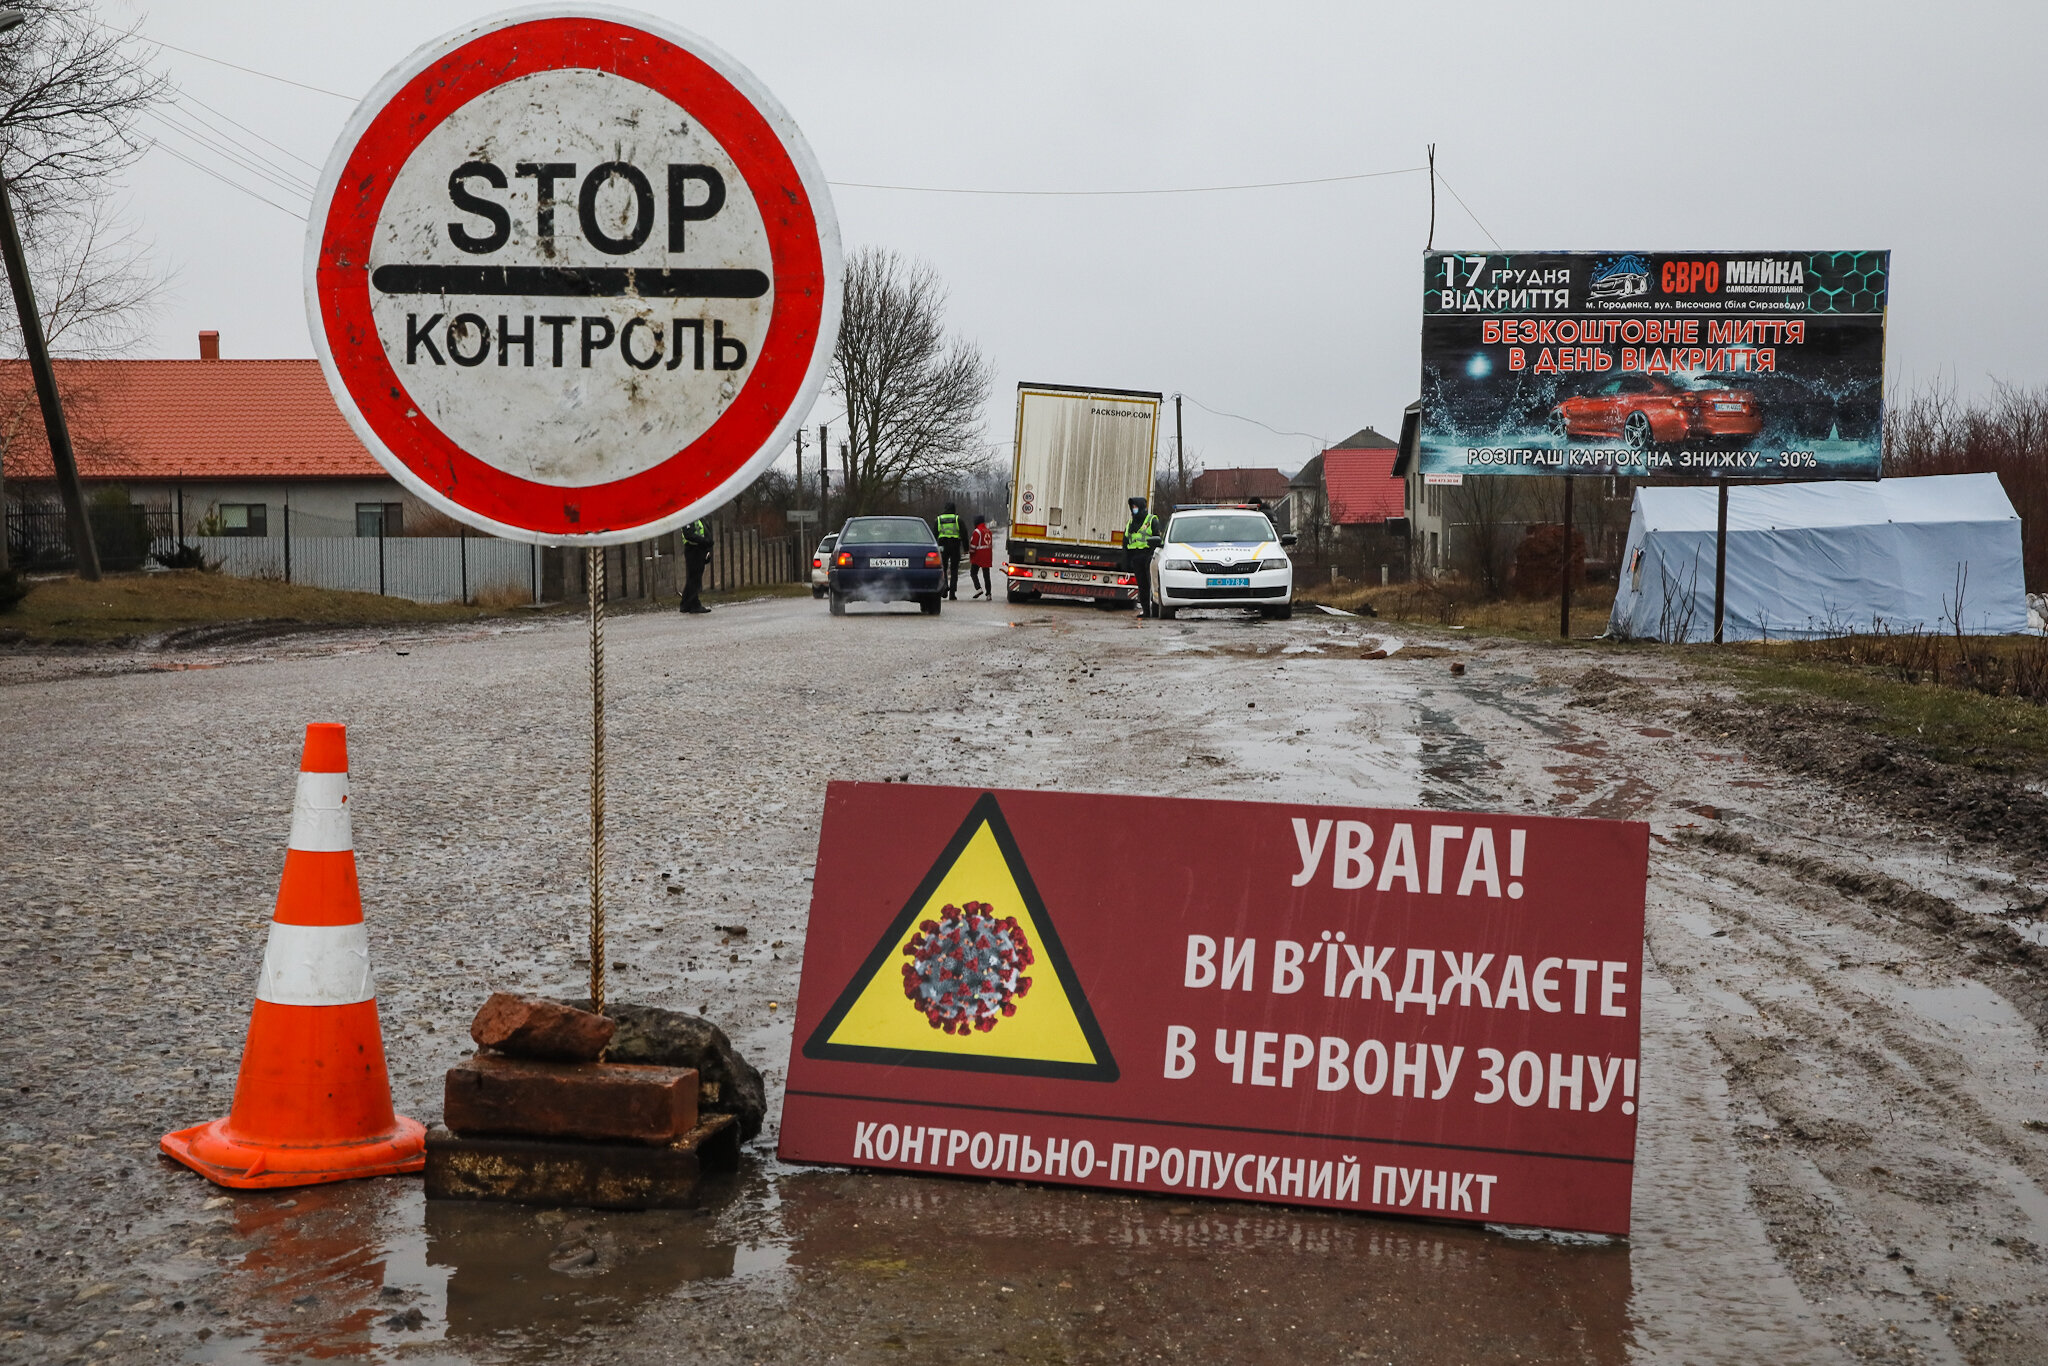 More than a dozen of checkpoints were set up in Ivano-Frankivsk Oblast after special commission deemed the situation there as critical and imposed the strictest restrictions of the so-called &#8220;red&#8221; zone on Feb. 26, 2021.